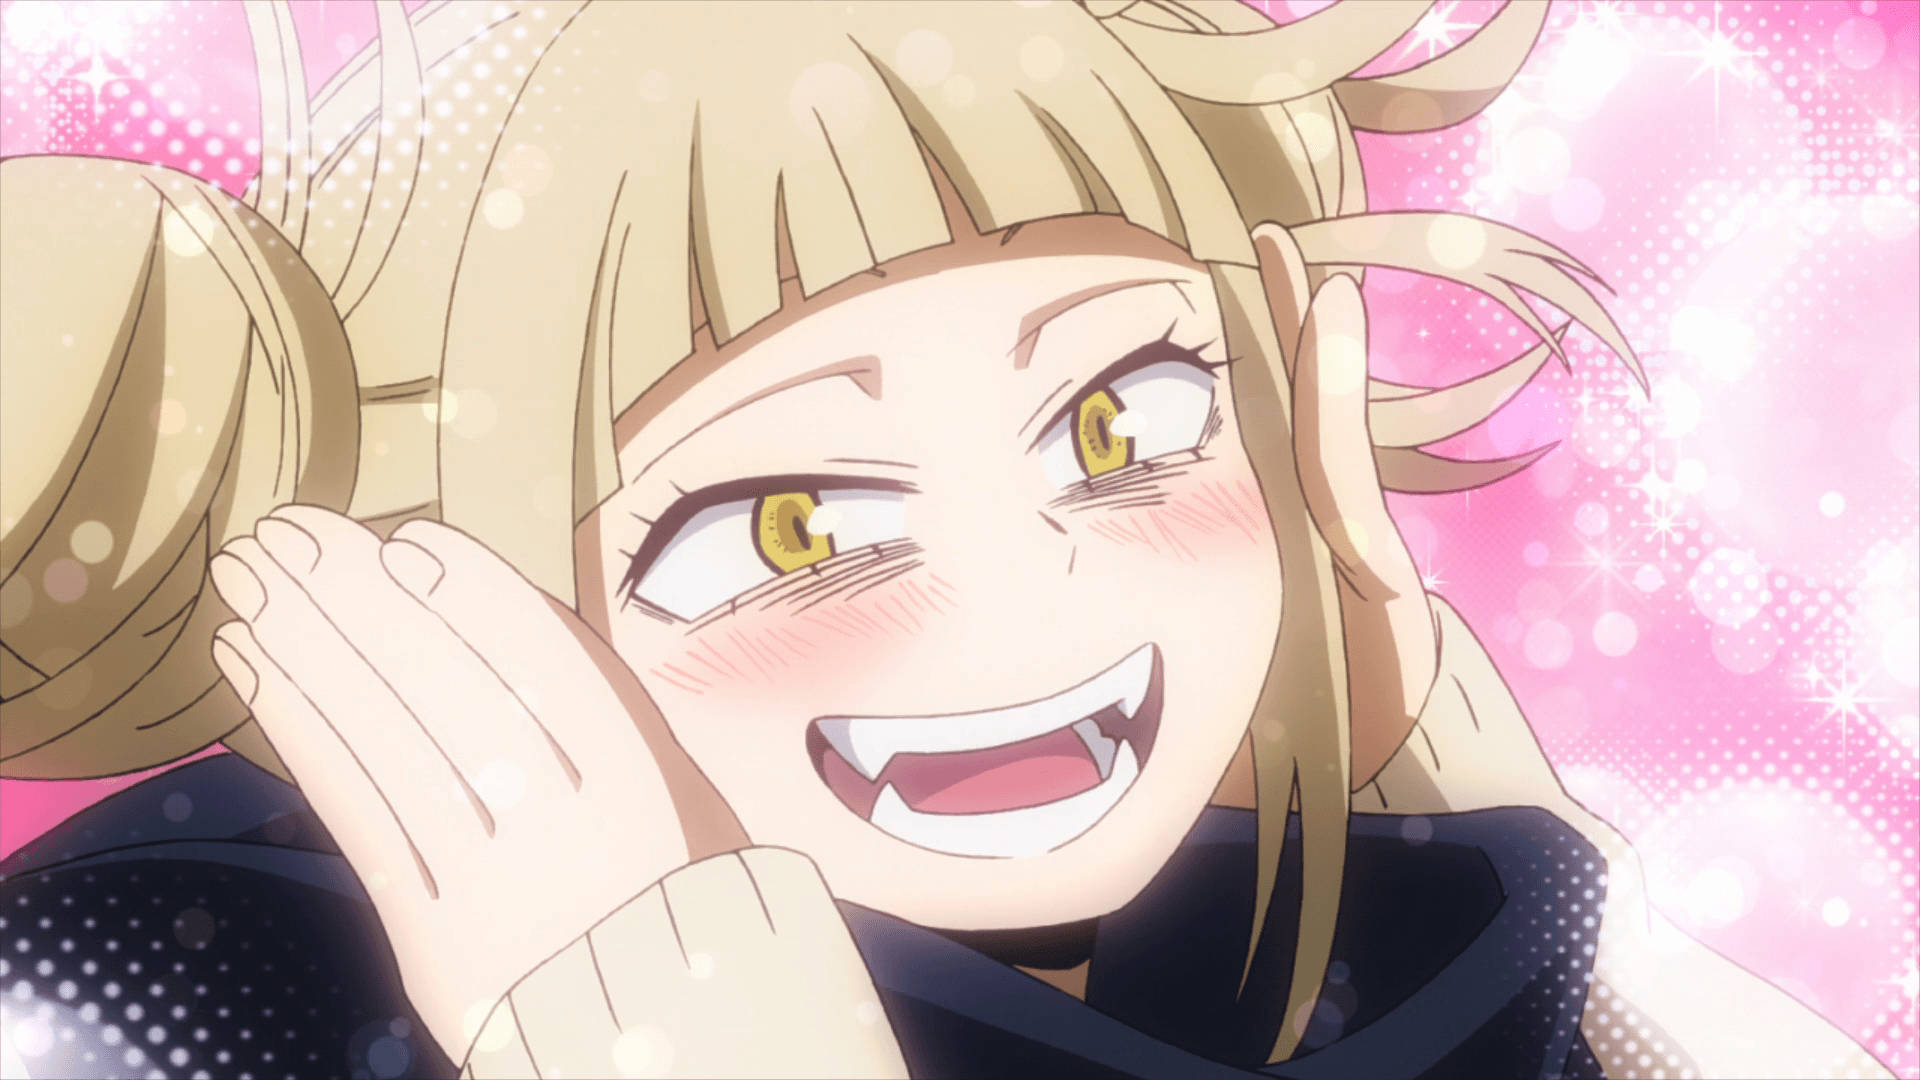 1920X1080 Himiko Toga Wallpaper and Background